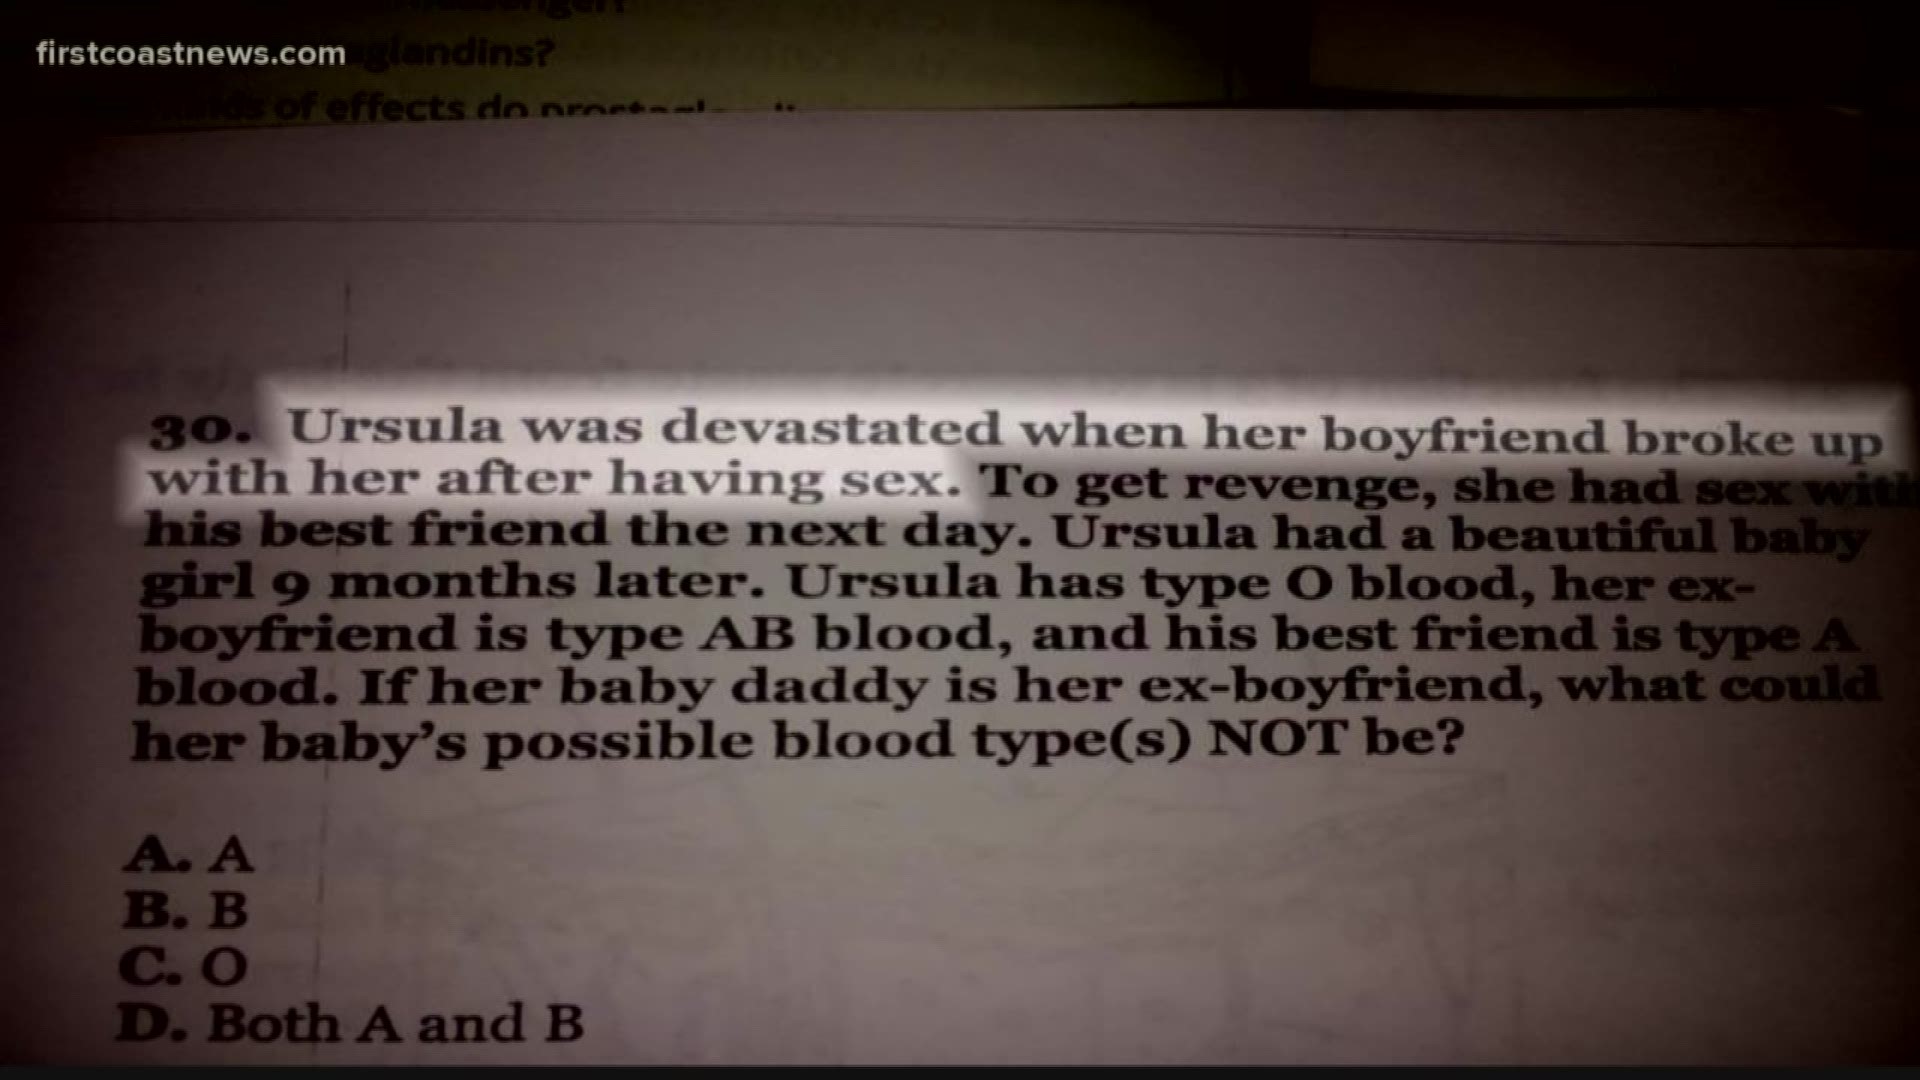 Father furious over daughters homework question about baby daddies, revenge sex 11alive